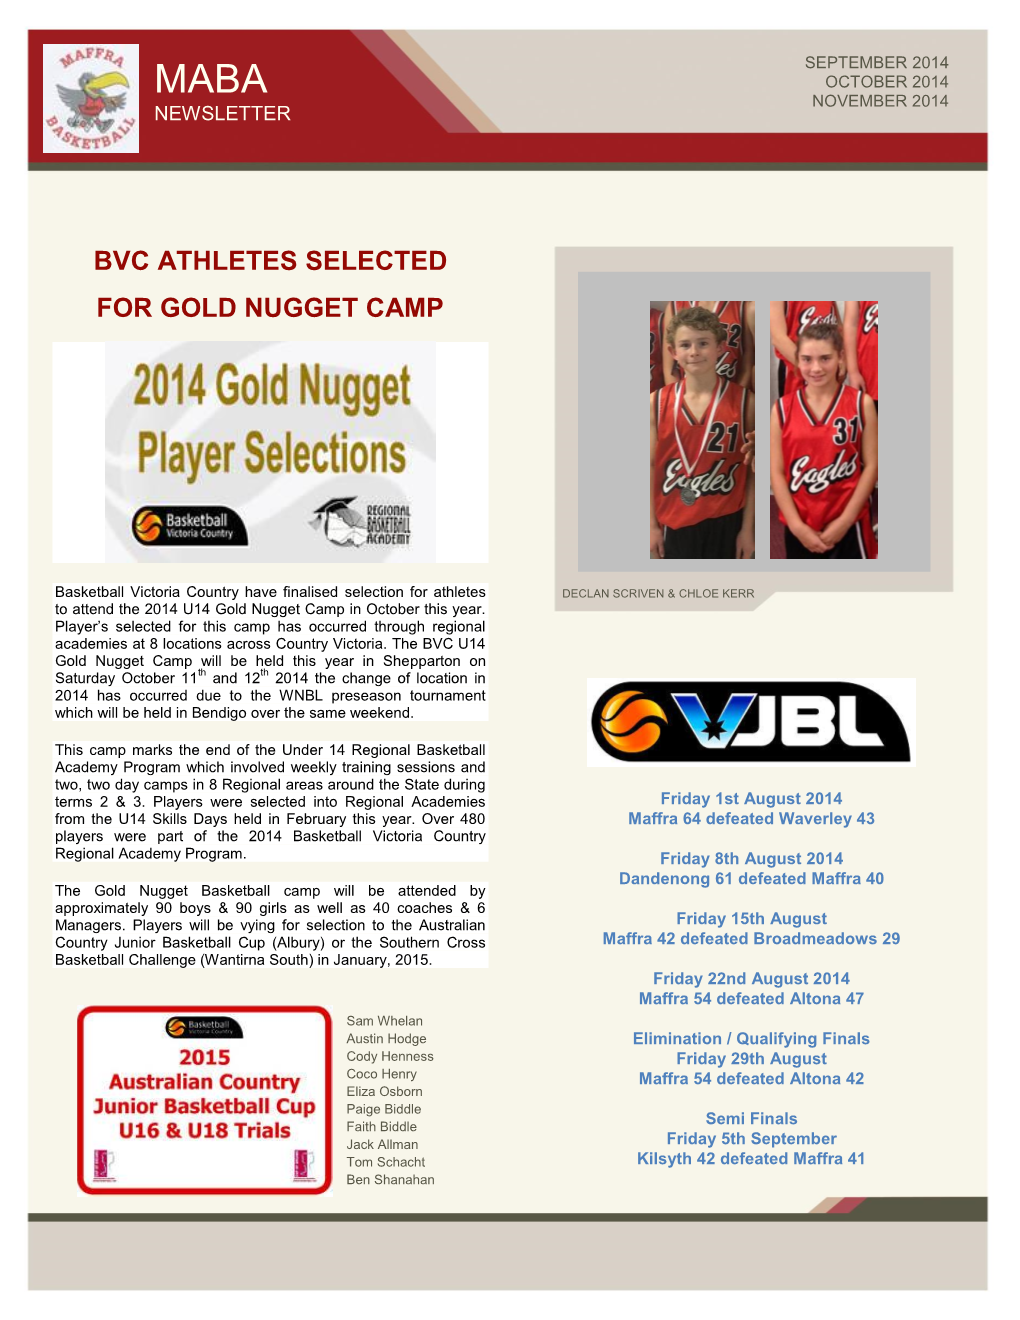 Bvc Athletes Selected for Gold Nugget Camp